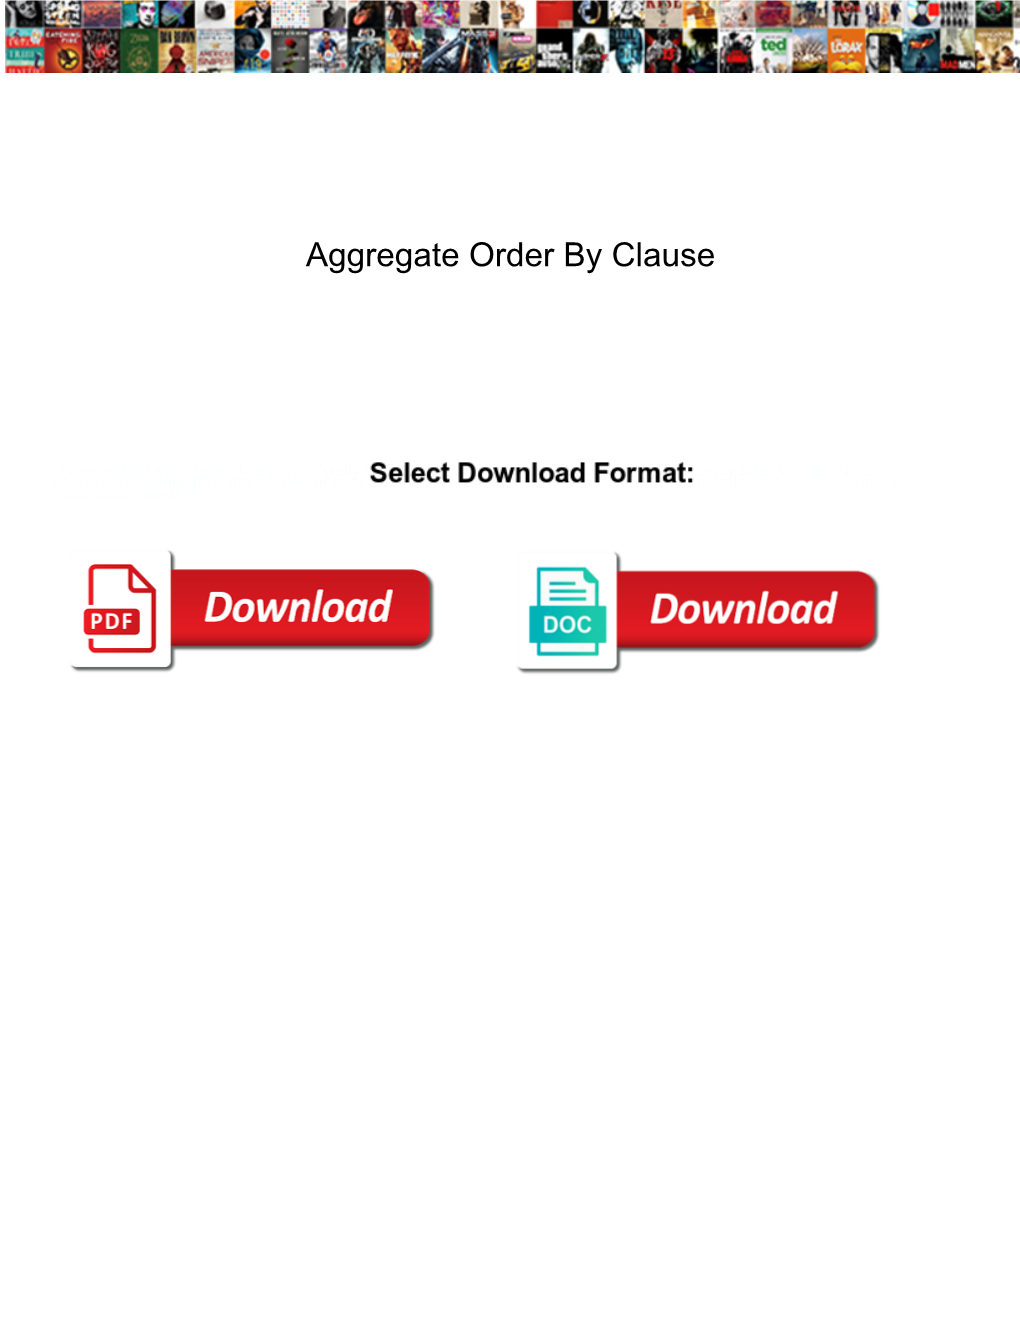 Aggregate Order by Clause